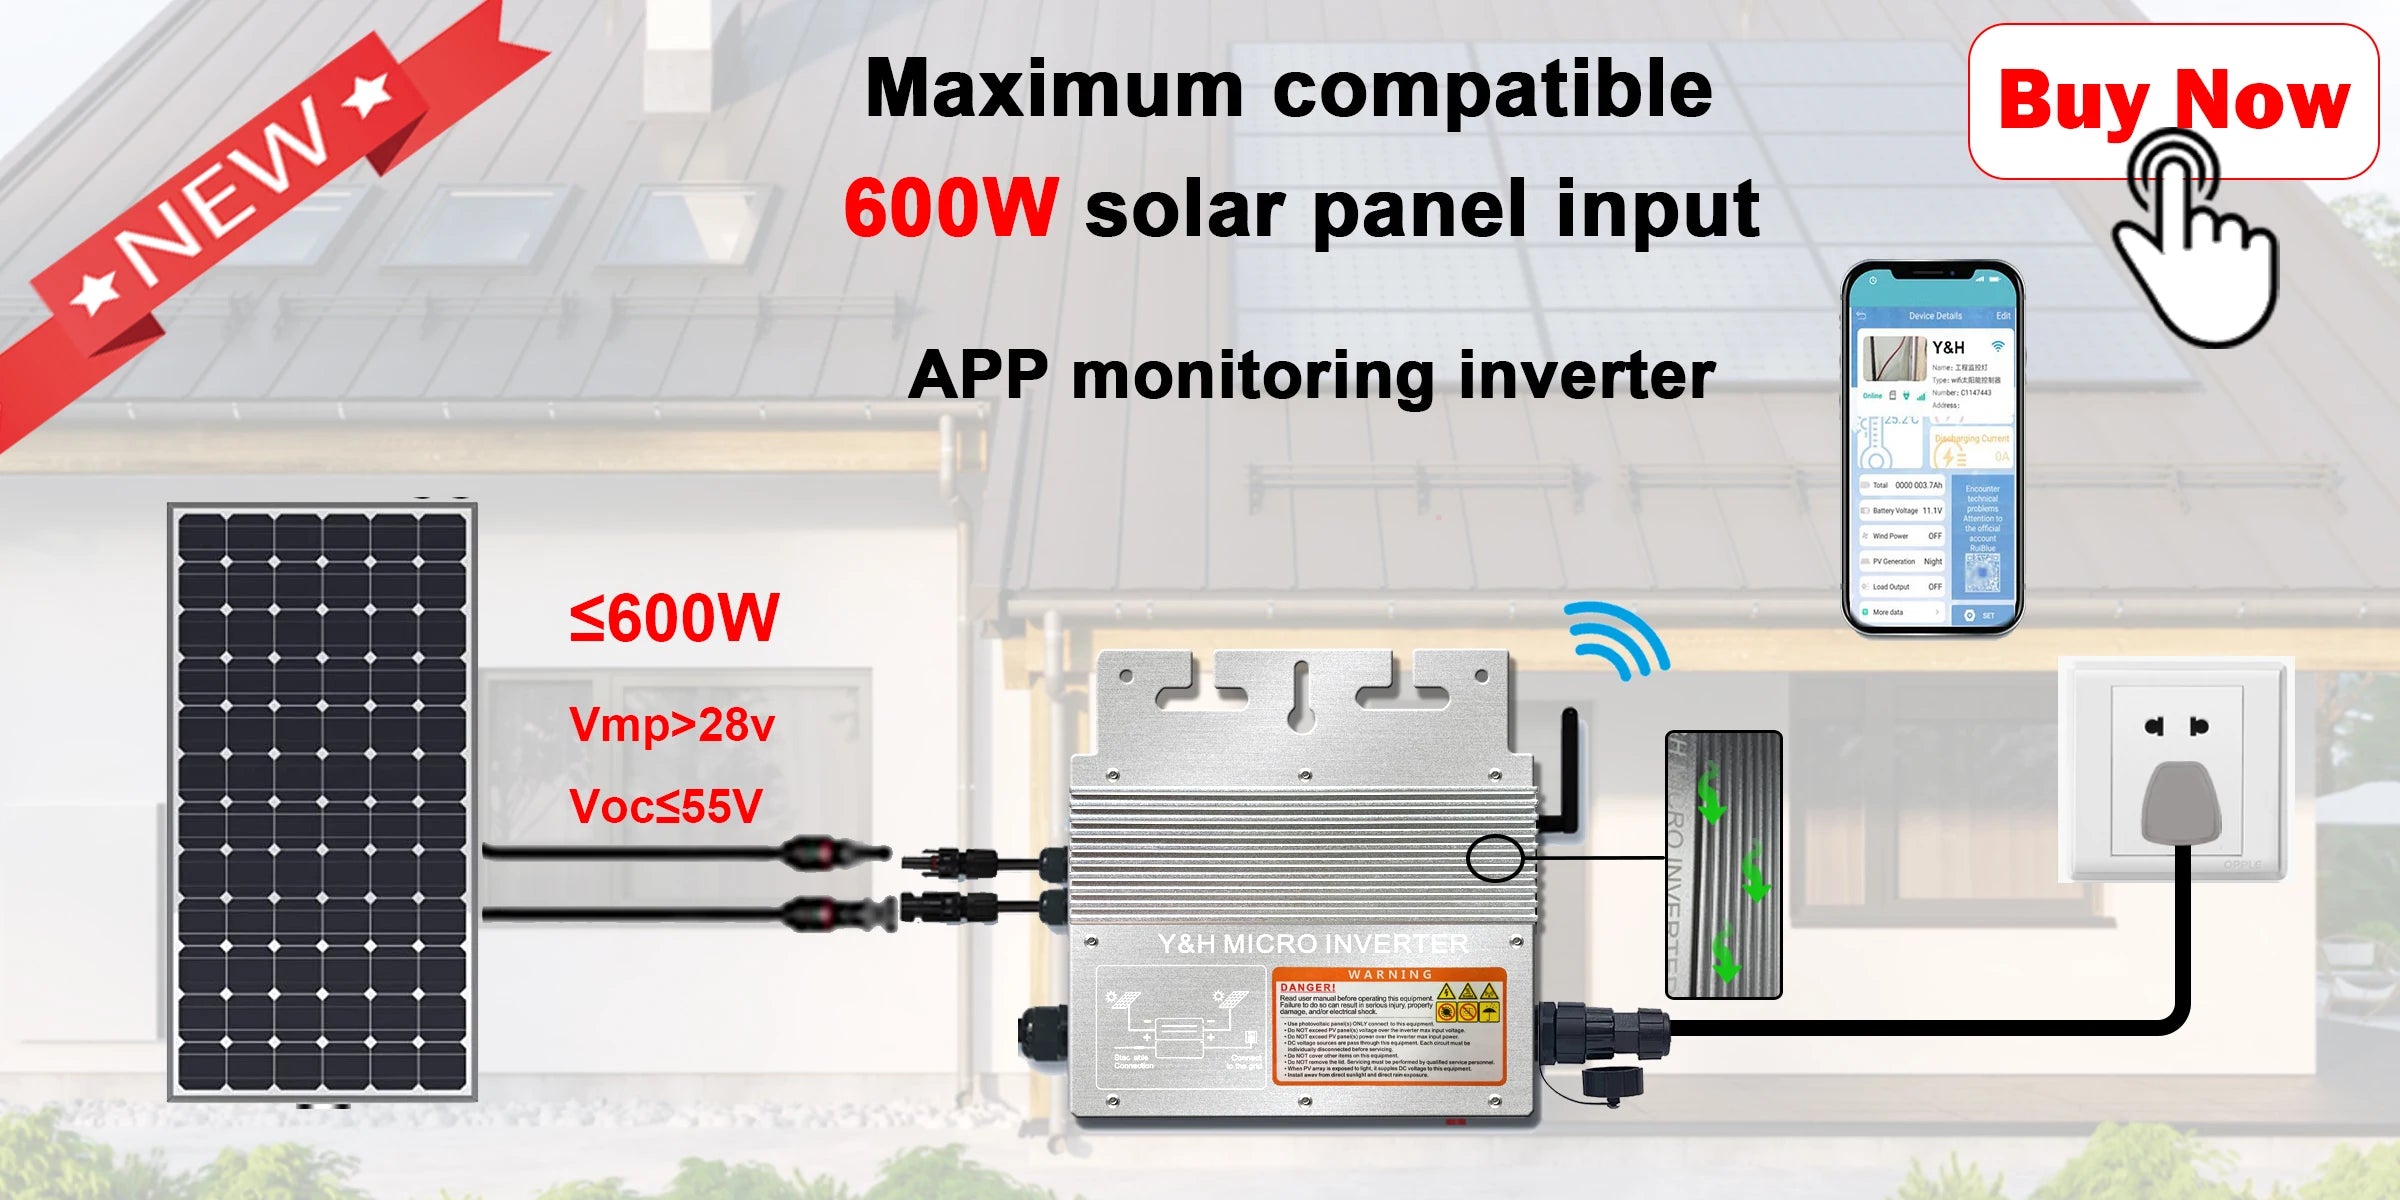 Solar inverter for residential/commercial use, supports up to 600W input, with APP monitoring and real-time tracking.